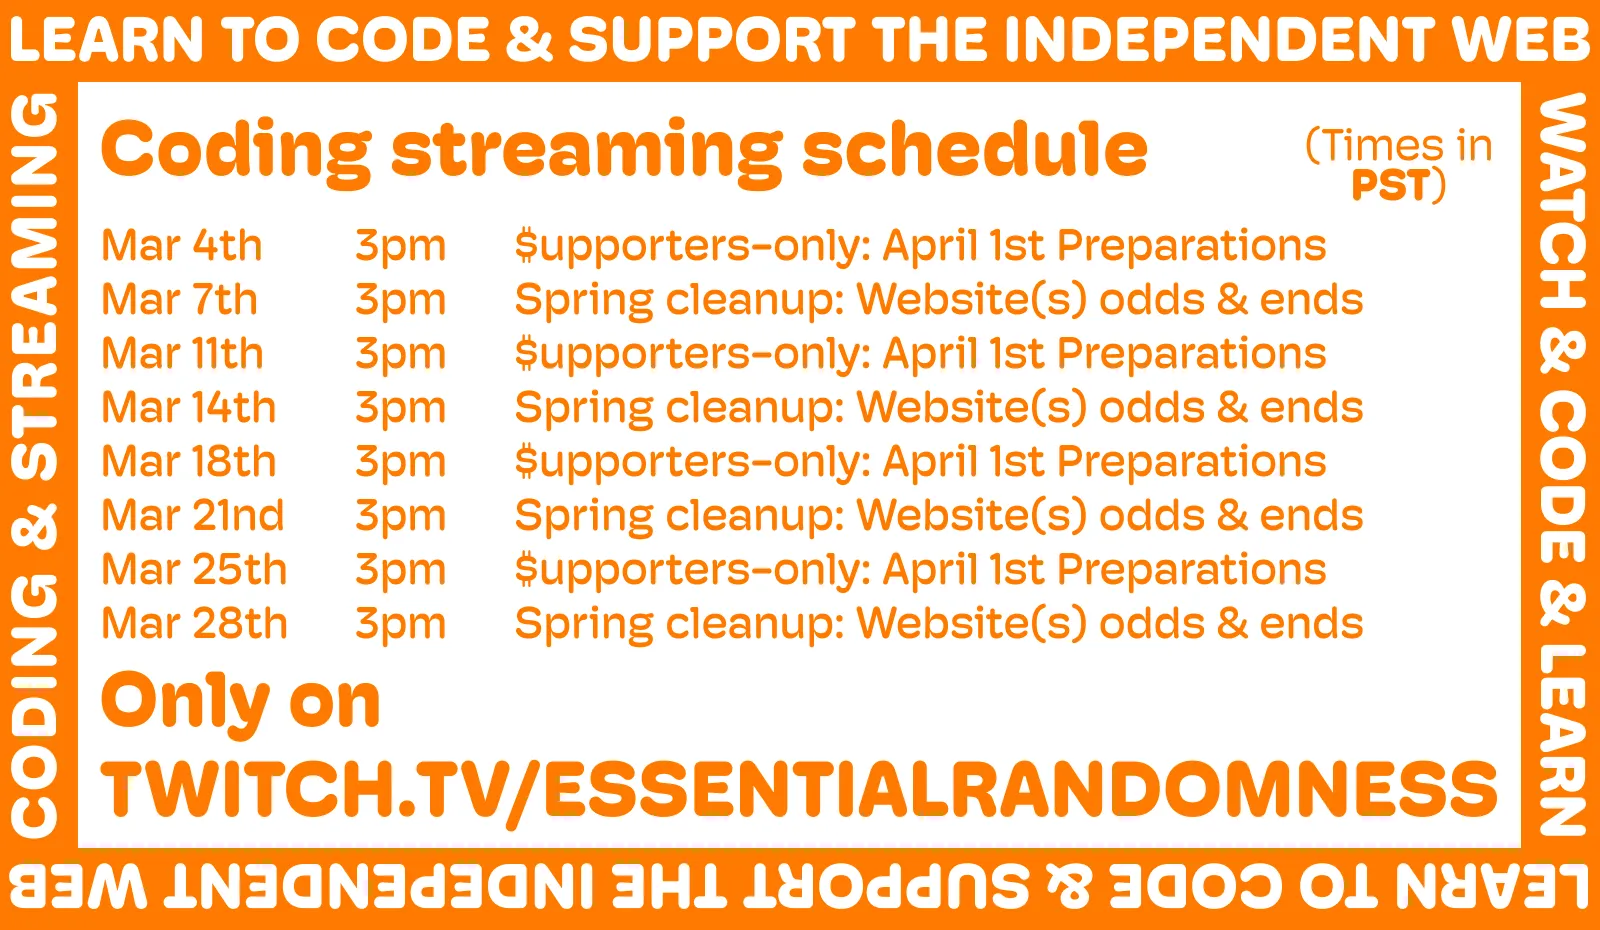 
A orange and white image announcing the new streaming schedule. It reads:

Coding streaming schedule (all streams at 3PM PST)

Mar 4th – $upporters-only: April 1st Preparations
Mar 7th – Spring cleanup: Website(s) odds & ends
Mar 11th – $upporters-only: April 1st Preparations
Mar 14th – Spring cleanup: Website(s) odds & ends
Mar 18th – $upporters-only: April 1st Preparations
Mar 21nd – Spring cleanup: Website(s) odds & ends
Mar 25th – $upporters-only: April 1st Preparations
Mar 28th – Spring cleanup: Website(s) odds & ends